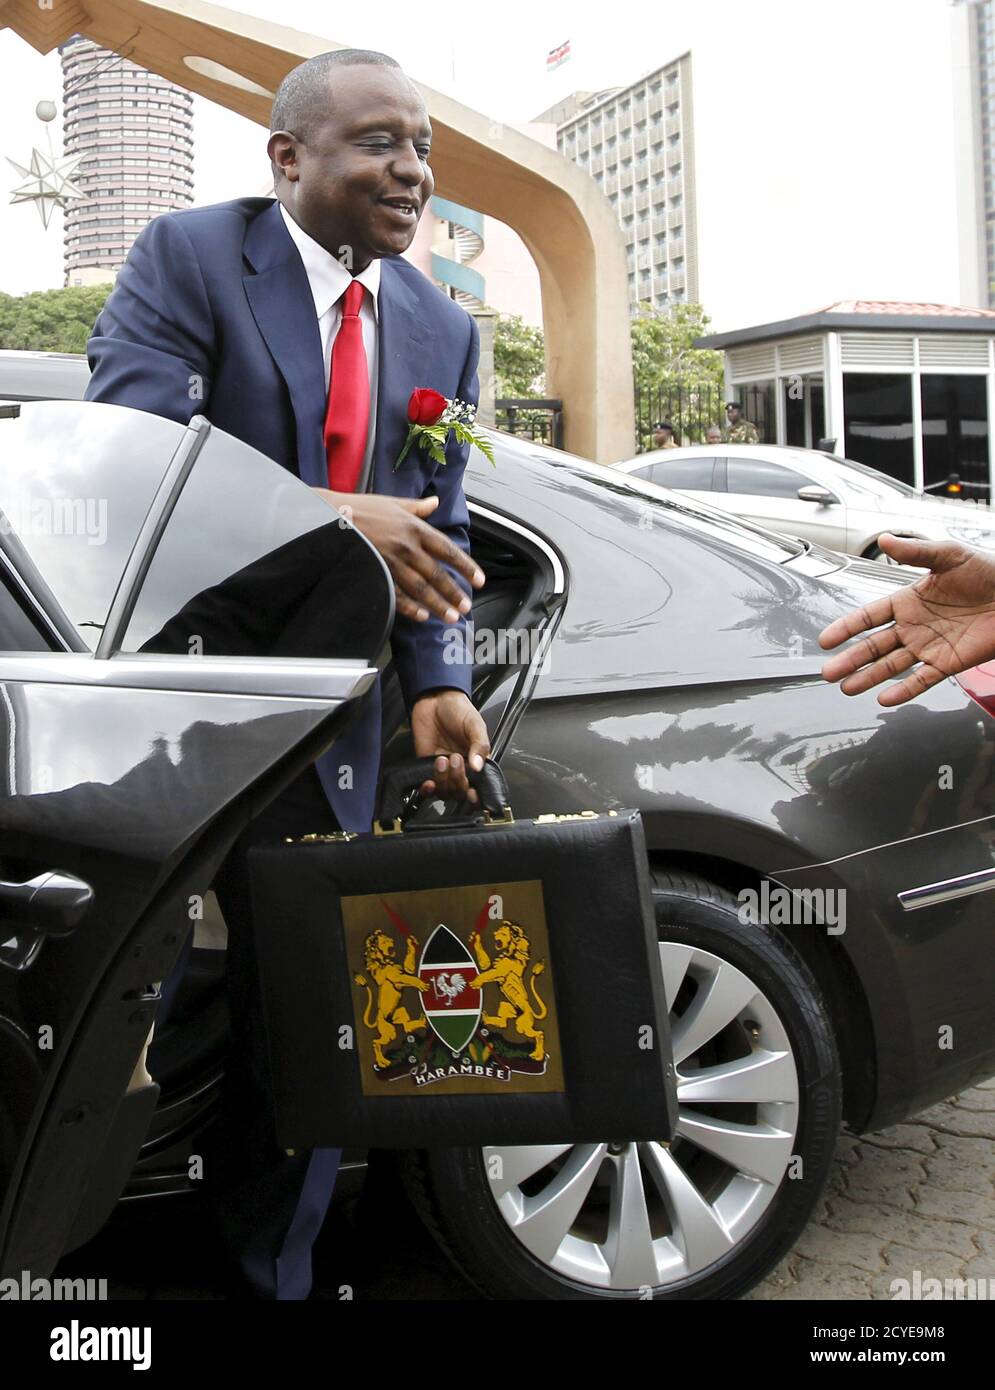 Kenya's Cabinet Secretary of National Treasury (Finance Minister) Henry Rotich carries the briefcase containing the Government Budget for the 2015/16 fiscal year as he arrives at the Parliament buildings in Nairobi, June 11, 2015. The minister said economy growth was 5.3 percent in 2014 and was expected to be between 6.5 to 7 percent in 2015, with the same pace continuing in the medium term. He said growth and employment prospects remained favourable. The budget announcements are coordinated across the East African Community, which comprises Kenya, Tanzania, Uganda, Rwanda and Burundi where th Stock Photo